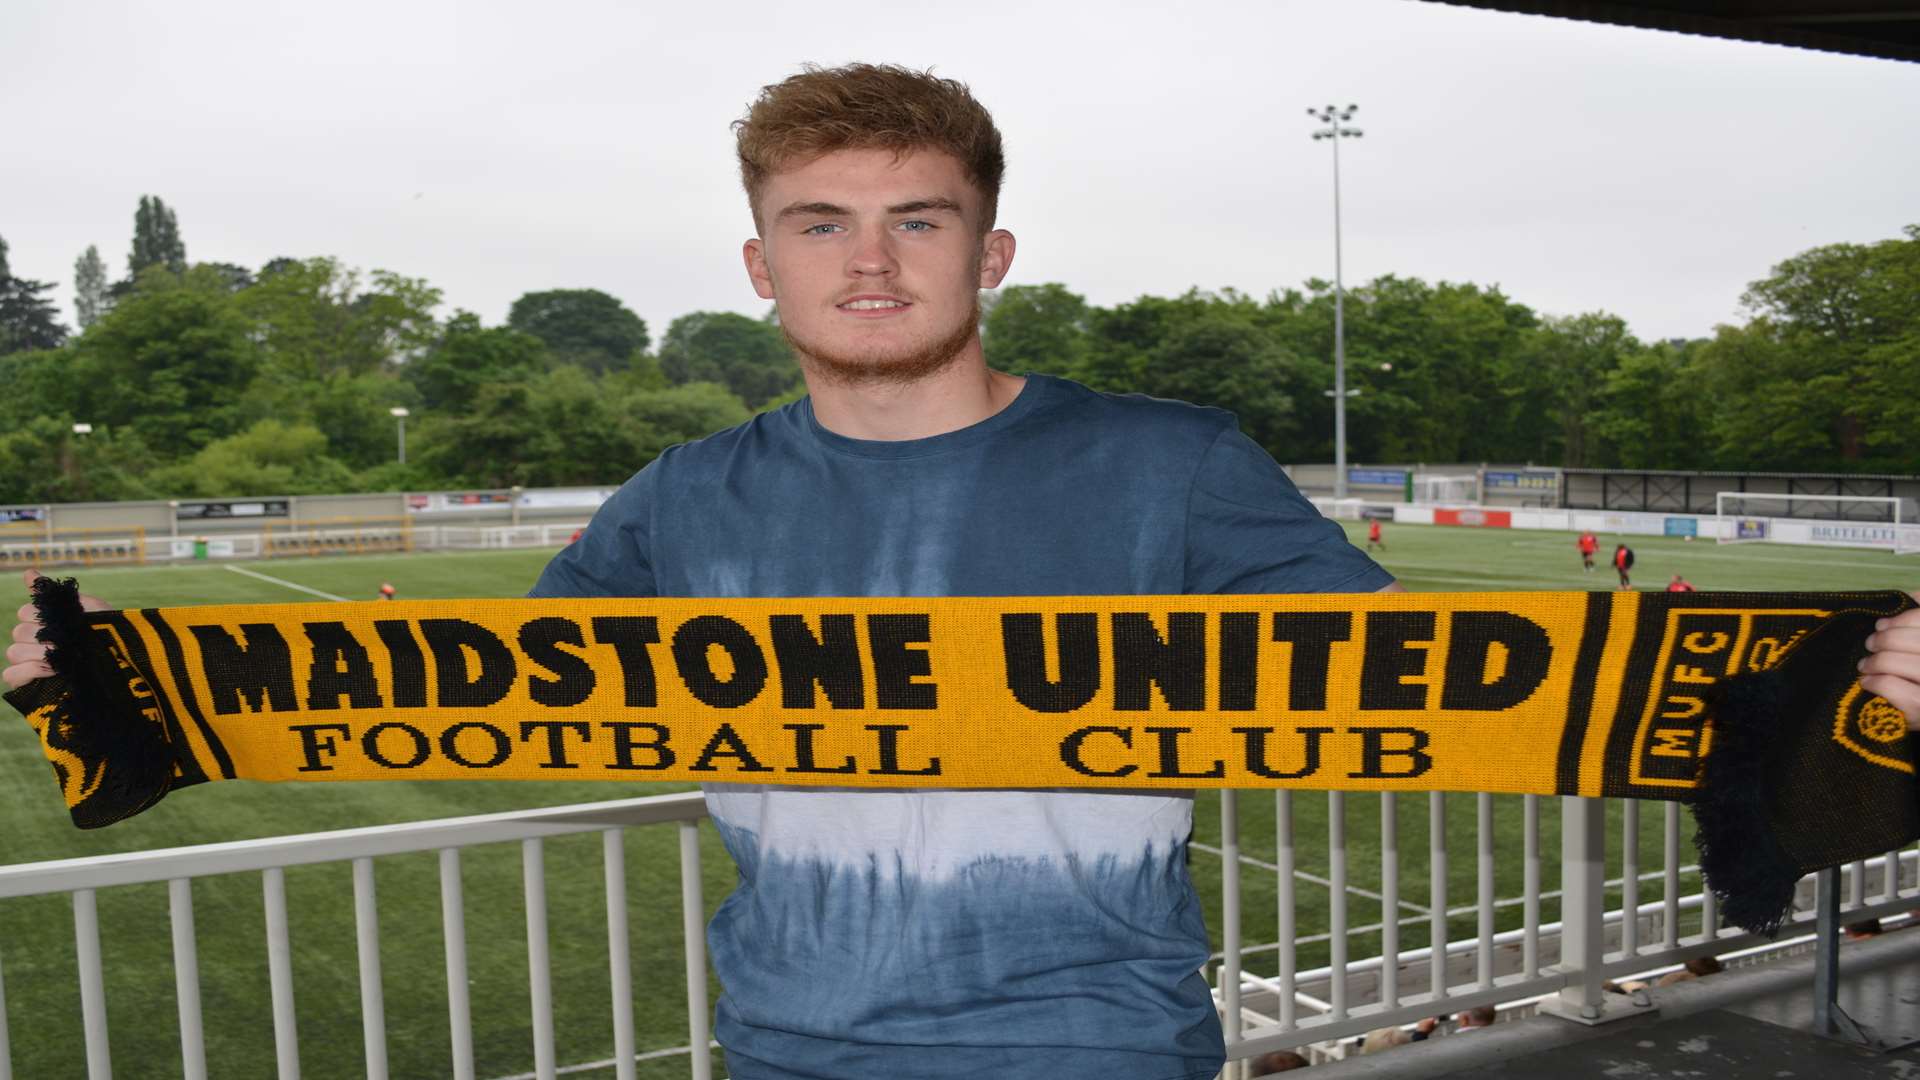 Bobby-Joe Taylor, one of three new signings made by Maidstone